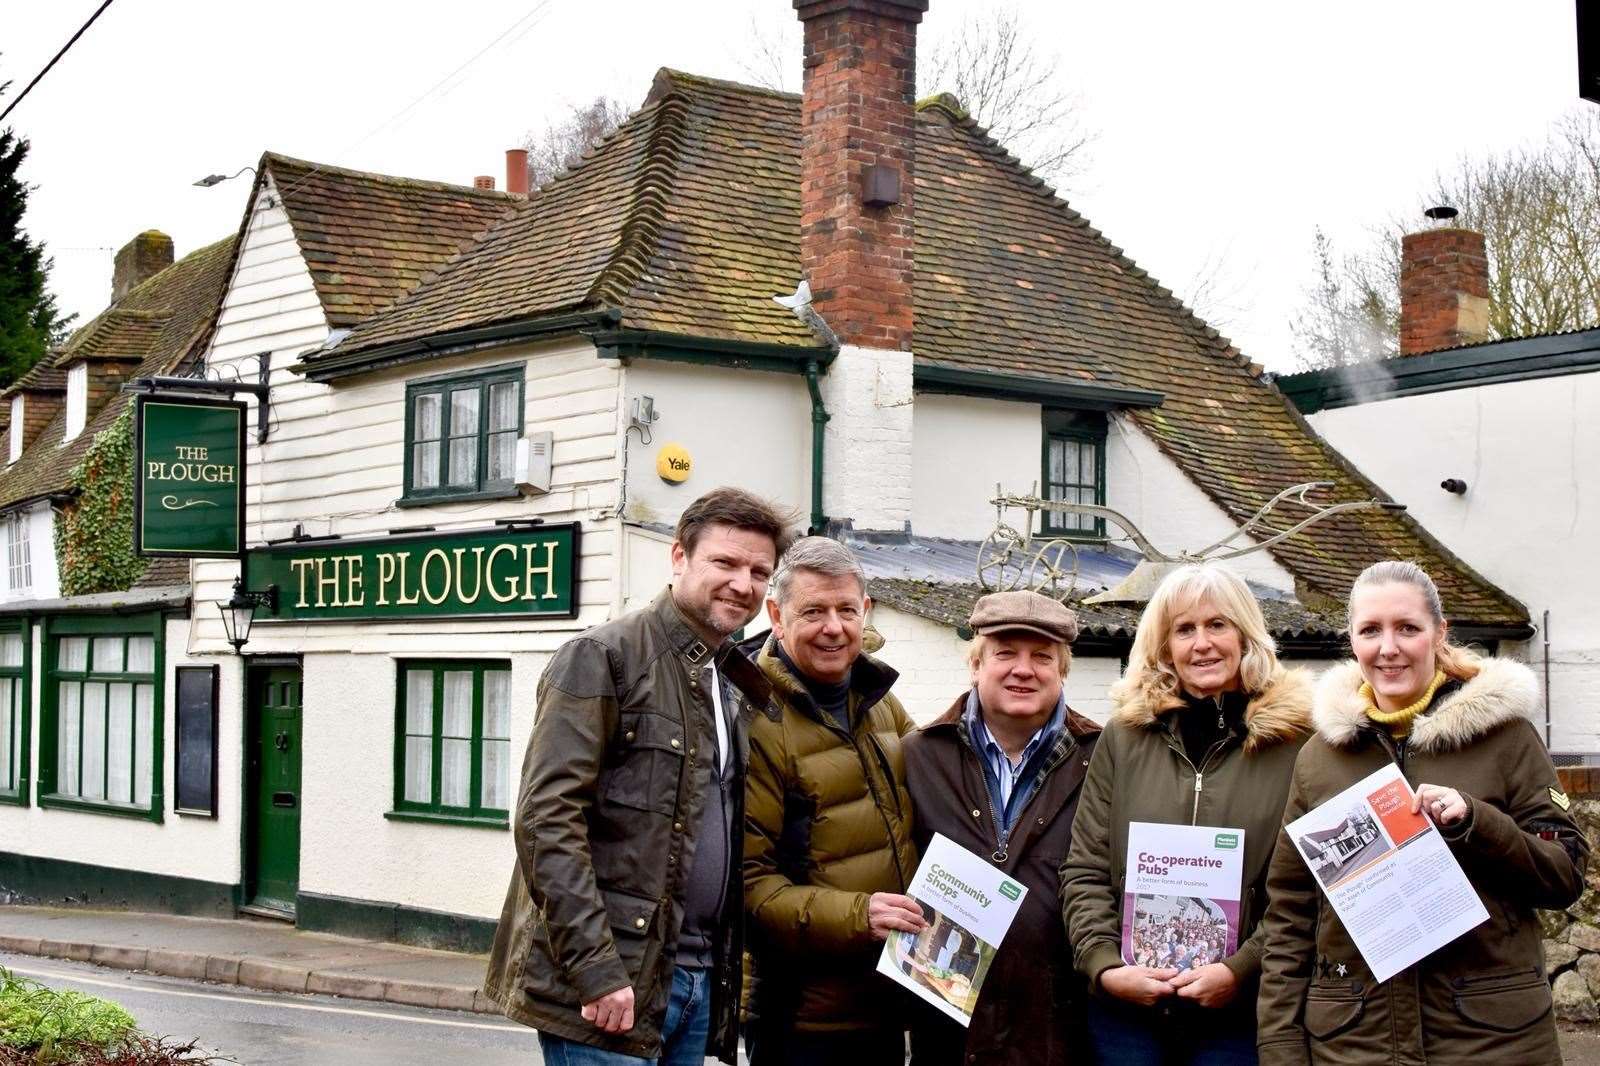 Oliver Shaw, Ian Mills, Jeremy Comber, Alison Prountzos and Laura Piggott outside The Plough in Trottiscliffe